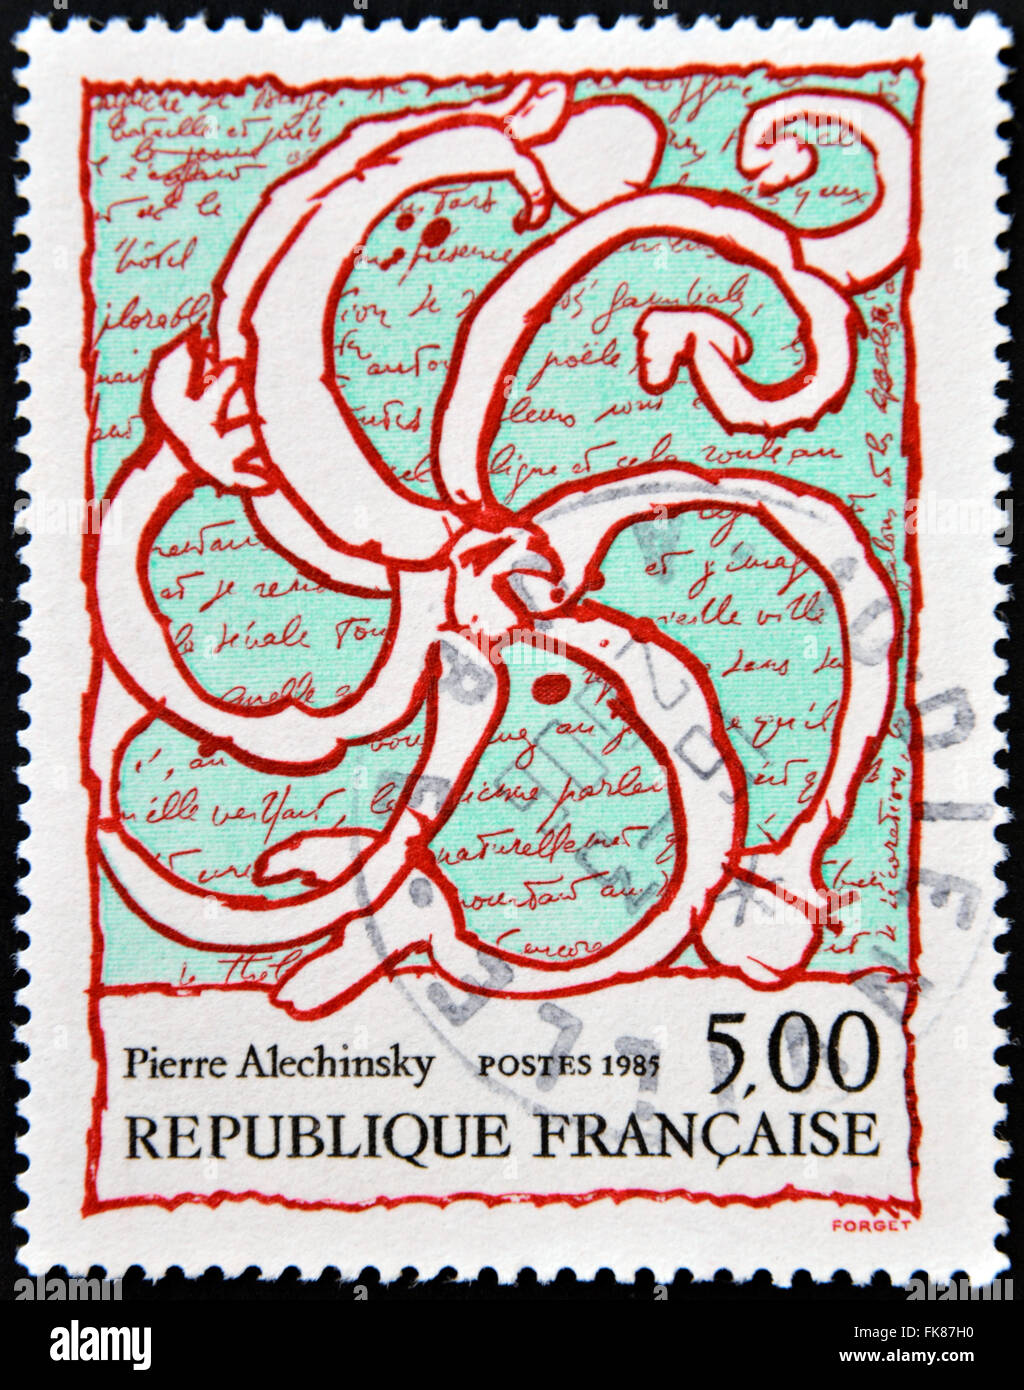 FRANCE - CIRCA 1985: a stamp printed in France shows Octopus Overlaid on Manuscript, Painting by Pierre Alechinsky, circa 1985 Stock Photo